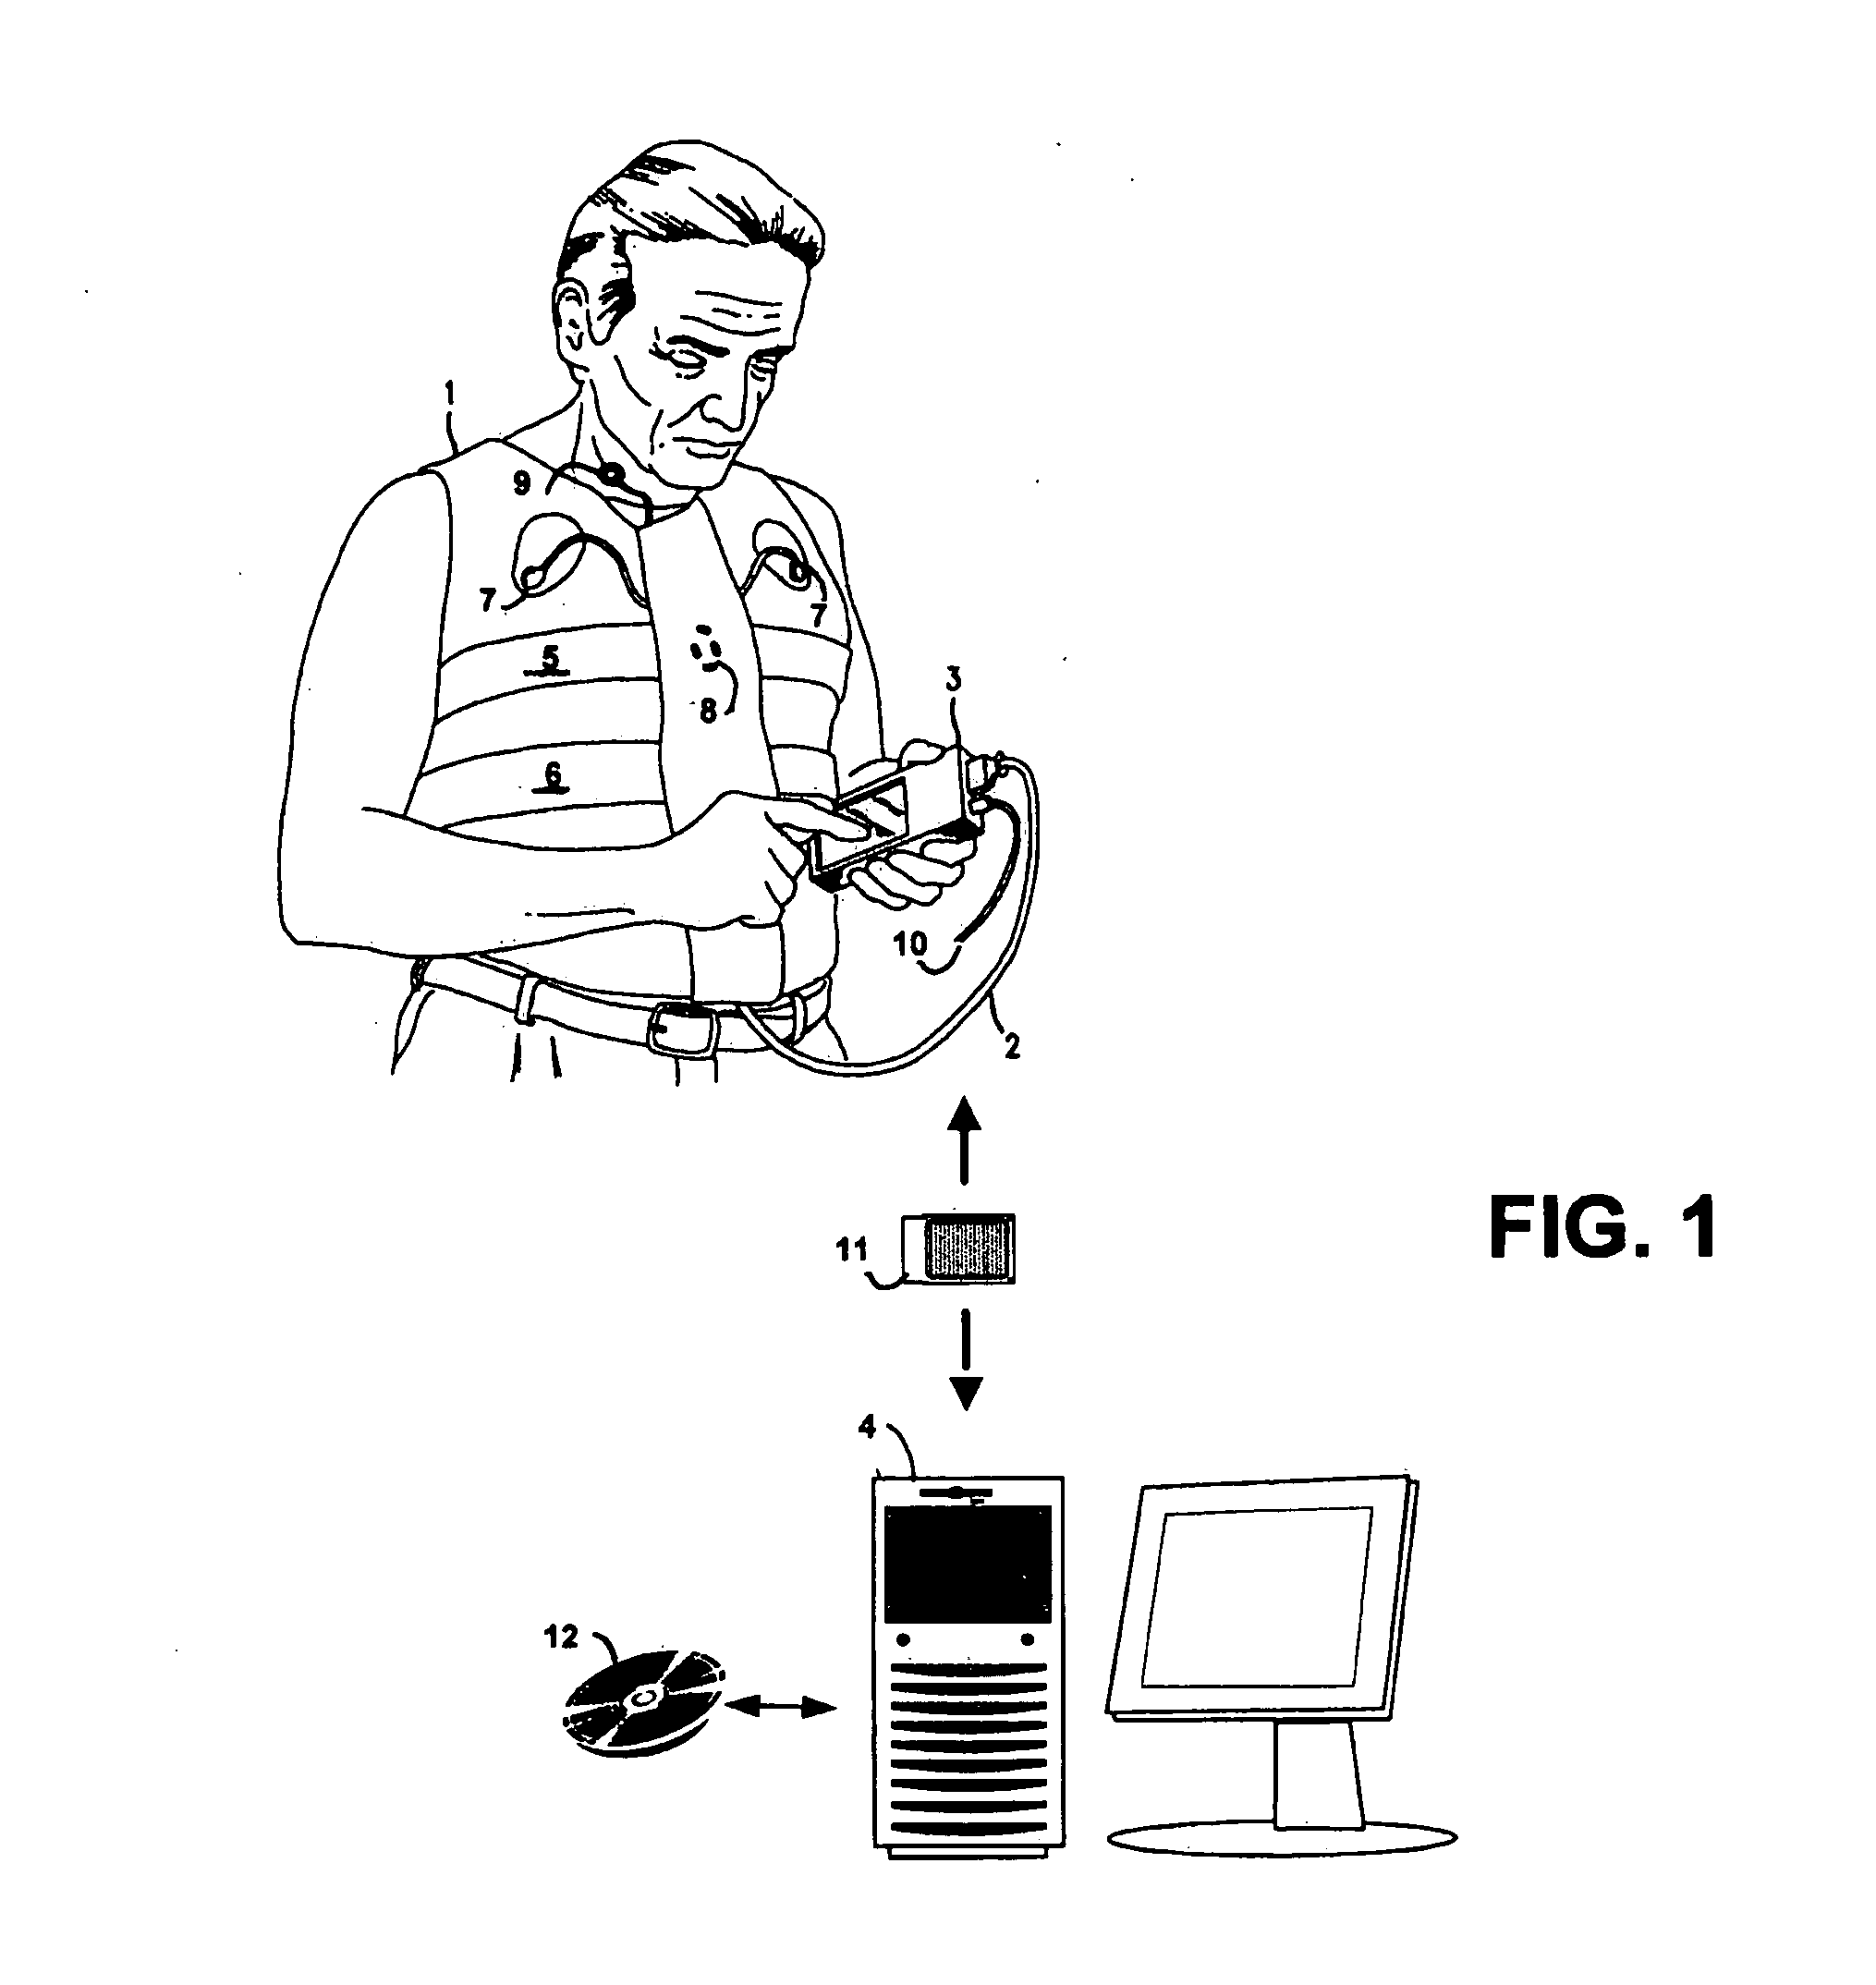 Systems and methods for respiratory event detection